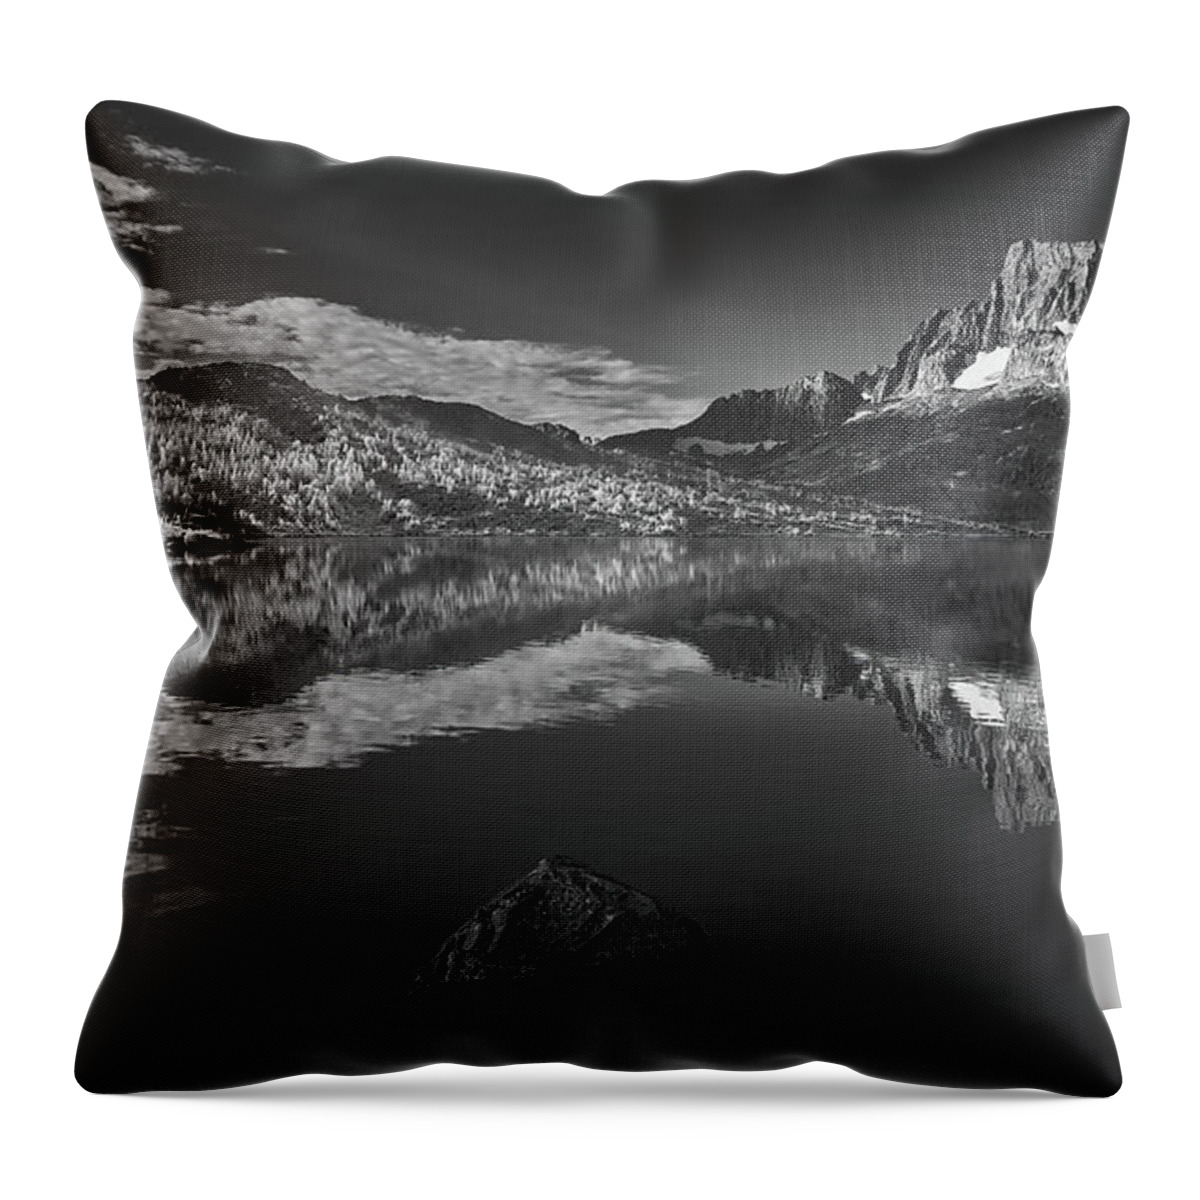  Throw Pillow featuring the photograph Questae by Romeo Victor